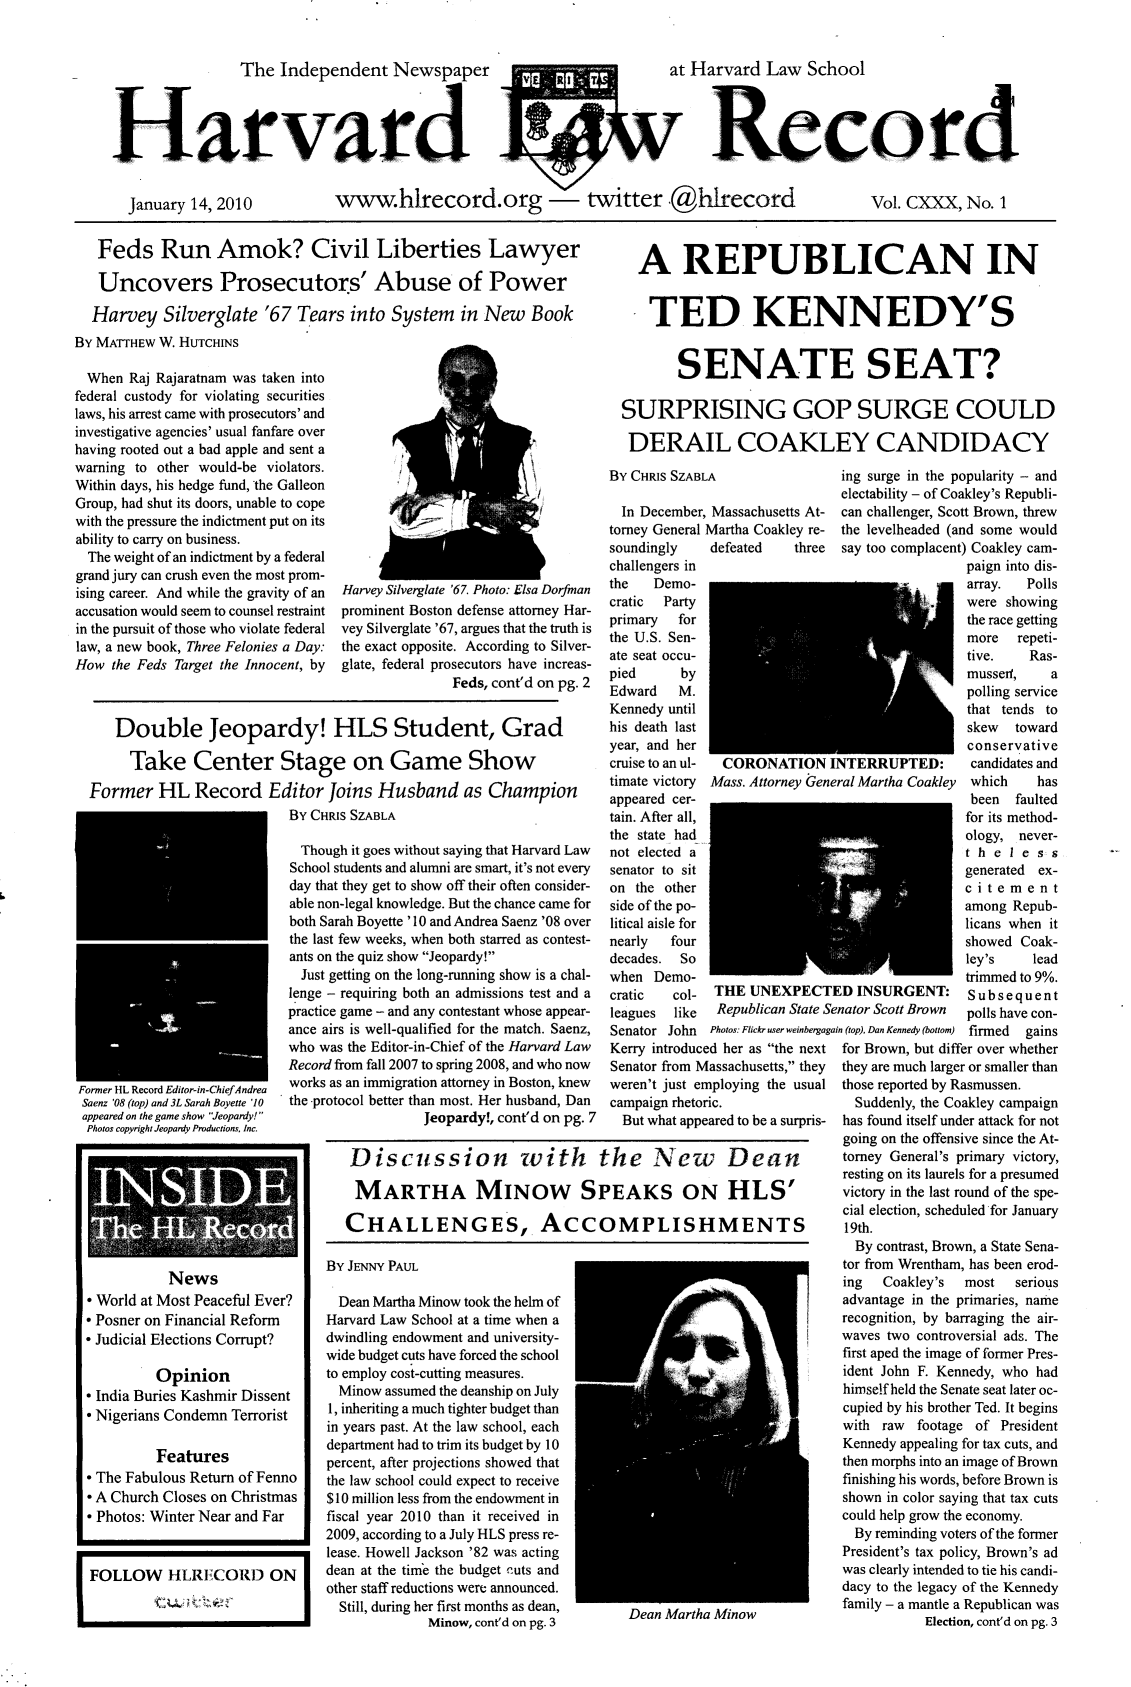 handle is hein.journals/hlrec130 and id is 1 raw text is: The Independent Newspaper  V asI   at Harvard Law School
Harrd                                             Record
January 14, 2010  www.hlrecord.org    twitter .@hlrecord      Vol. CXXX, No. 1

Feds Run Amok? Civil Liberties Lawyer
Uncovers Prosecutors' Abuse of Power
Harvey Silverglate '67 Tears into System in New Book

By MATTHEW W. HUTCHINS
When Raj Rajaratnam was taken into
federal custody for violating securities
laws, his arrest came with prosecutors' and
investigative agencies' usual fanfare over
having rooted out a bad apple and sent a
warning to other would-be violators.
Within days, his hedge find, the Galleon
Group, had shut its doors, unable to cope
with the pressure the indictment put on its
ability to carry on business.
The weight of an indictment by a federal
grand jury can crush even the most prom-
ising career. And while the gravity of an
accusation would seem to counsel restraint
in the pursuit of those who violate federal
law, a new book, Three Felonies a Day:
How the Feds Target the Innocent, by

Harvey Silverglate '67. Photo: Elsa Dorfinan
prominent Boston defense attorney Har-
vey Silverglate '67, argues that the truth is
the exact opposite. According to Silver-
glate, federal prosecutors have increas-
Feds, cont'd on pg. 2

Double Jeopardy! HLS Student, Grad
Take Center Stage on Game Show
Former HL Record Editor Joins Husband as Champion
By CHRIS SZABLA

Former HL KeCOrd Lt dor-in-Chief Andrea
Saenz '08 (top) and 3L Sarah Boyette '10

appeared on the game show Jeopardy!
Photos copyright Jeopardy Productions, Inc.
News
* World at Most Peaceful Ever?
* Posner on Financial Reform
* Judicial Elections Corrupt?
Opinion
* India Buries Kashmir Dissent
* Nigerians Condemn Terrorist
Features
* The Fabulous Return of Fenno
* A Church Closes on Christmas
* Photos: Winter Near and Far

Though it goes without saying that Harvard Law
School students and alumni are smart, it's not every
day that they get to show off their often consider-
able non-legal knowledge. But the chance came for
both Sarah Boyette '10 and Andrea Saenz '08 over
the last few weeks, when both starred as contest-
ants on the quiz show Jeopardy!
Just getting on the long-running show is a chal-
lenge - requiring both an admissions test and a
practice game - and any contestant whose appear-
ance airs is well-qualified for the match. Saenz,
who was the Editor-in-Chief of the Harvard Law
Record from fall 2007 to spring 2008, and who now
works as an immigration attorney in Boston, knew
the -protocol better than most. Her husband, Dan

Jeopardy!, cont'd on pg. 7

By JENNY PAUL
Dean Martha Minow took the helm of
Harvard Law School at a time when a
dwindling endowment and university-
wide budget cuts have forced the school
to employ cost-cutting measures.
Minow assumed the deanship on July
1, inheriting a much tighter budget than
in years past. At the law school, each
department had to trim its budget by 10
percent, after projections showed that
the law school could expect to receive
$10 million less from the endowment in
fiscal year 2010 than it received in
2009, according to a July HLS press re-
lease. Howell Jackson '82 was acting
dean at the tim'e the budget cuts and
other staff reductions were announced.
Still, during her first months as dean,
Minow, cont'd on pg. 3

A REPUBLICAN IN
TED KENNEDY'S
SENATE SEAT?
SURPRISING GOP SURGE COULD
DERAIL COAKLEY CANDIDACY

By CHRIS SZABLA
In December, Massachusetts At-
torney General Martha Coakley re-
soundingly    defeated   three
challengers in
the   Demo-
cratic  Party
primary  for
the U.S. Sen-
ate seat occu-
pied      by
Edward M.
Kennedy until
his death last
year, and her
cruise to an ul-  CORONATIONI
timate victory  Mass. Attorney Gen
appeared cer-
tain. After all,
the state had
not elected a
senator to sit
on the other
side of the po-
litical aisle for
nearly  four
decades.  So
when Demo-
cratic   col-  THE UNEXPECT
leagues  like  Republican State S
Senator John Photos: Fickr user weinbergag
Kerry introduced her as the next
Senator from Massachusetts, they
weren't just employing the usual
campaign rhetoric.
But what appeared to be a surpris-

ing surge in the popularity - and
electability - of Coakley's Republi-
can challenger, Scott Brown, threw
the levelheaded (and some would
say too complacent) Coakley cam-
paign into dis-
array.  Polls
were showing
the race getting
more   repeti-
tive.    Ras-
mussedI,    a
polling service
that tends to

INTERRUPTED:
eral Martha Coakley

'ED INSURGENT:
Senator Scott Brown
rain (top), Dan Kennedy (bottom)

skew toward
conservative
candidates and
which     has
been faulted
for its method-
ology, never-
theless
generated ex-
citement
among Repub-
licans when it
showed Coak-
ley's     lead
trimmed to 9%.
Subsequent
polls have con-
firmed gains

for Brown, but differ over whether
they are much larger or smaller than
those reported by Rasmussen.
Suddenly, the Coakley campaign
has found itself under attack for not
going on the offensive since the At-
torney General's primary victory,
resting on its laurels for a presumed
victory in the last round of the spe-
cial election, scheduled for January
19th.
By contrast, Brown, a State Sena-
tor from Wrentham, has been erod-
ing   Coakley's  most   serious
advantage in the primaries, name
recognition, by barraging the air-
waves two controversial ads. The
first aped the image of former Pres-
ident John F. Kennedy, who had
himself held the Senate seat later oc-
cupied by his brother Ted. It begins
with raw footage of President
Kennedy appealing for tax cuts, and
then morphs into an image of Brown
finishing his words, before Brown is
shown in color saying that tax cuts
could help grow the economy.
By reminding voters of the former
President's tax policy, Brown's ad
was clearly intended to tie his candi-
dacy to the legacy of the Kennedy
family - a mantle a Republican was
Election, cont'd on pg. 3

Dean Martha Minow

Discussion with the New Dean
MARTHA MINOW SPEAKS ON HLS'
CHALLENGES, ACCOMPLISHMENTS


